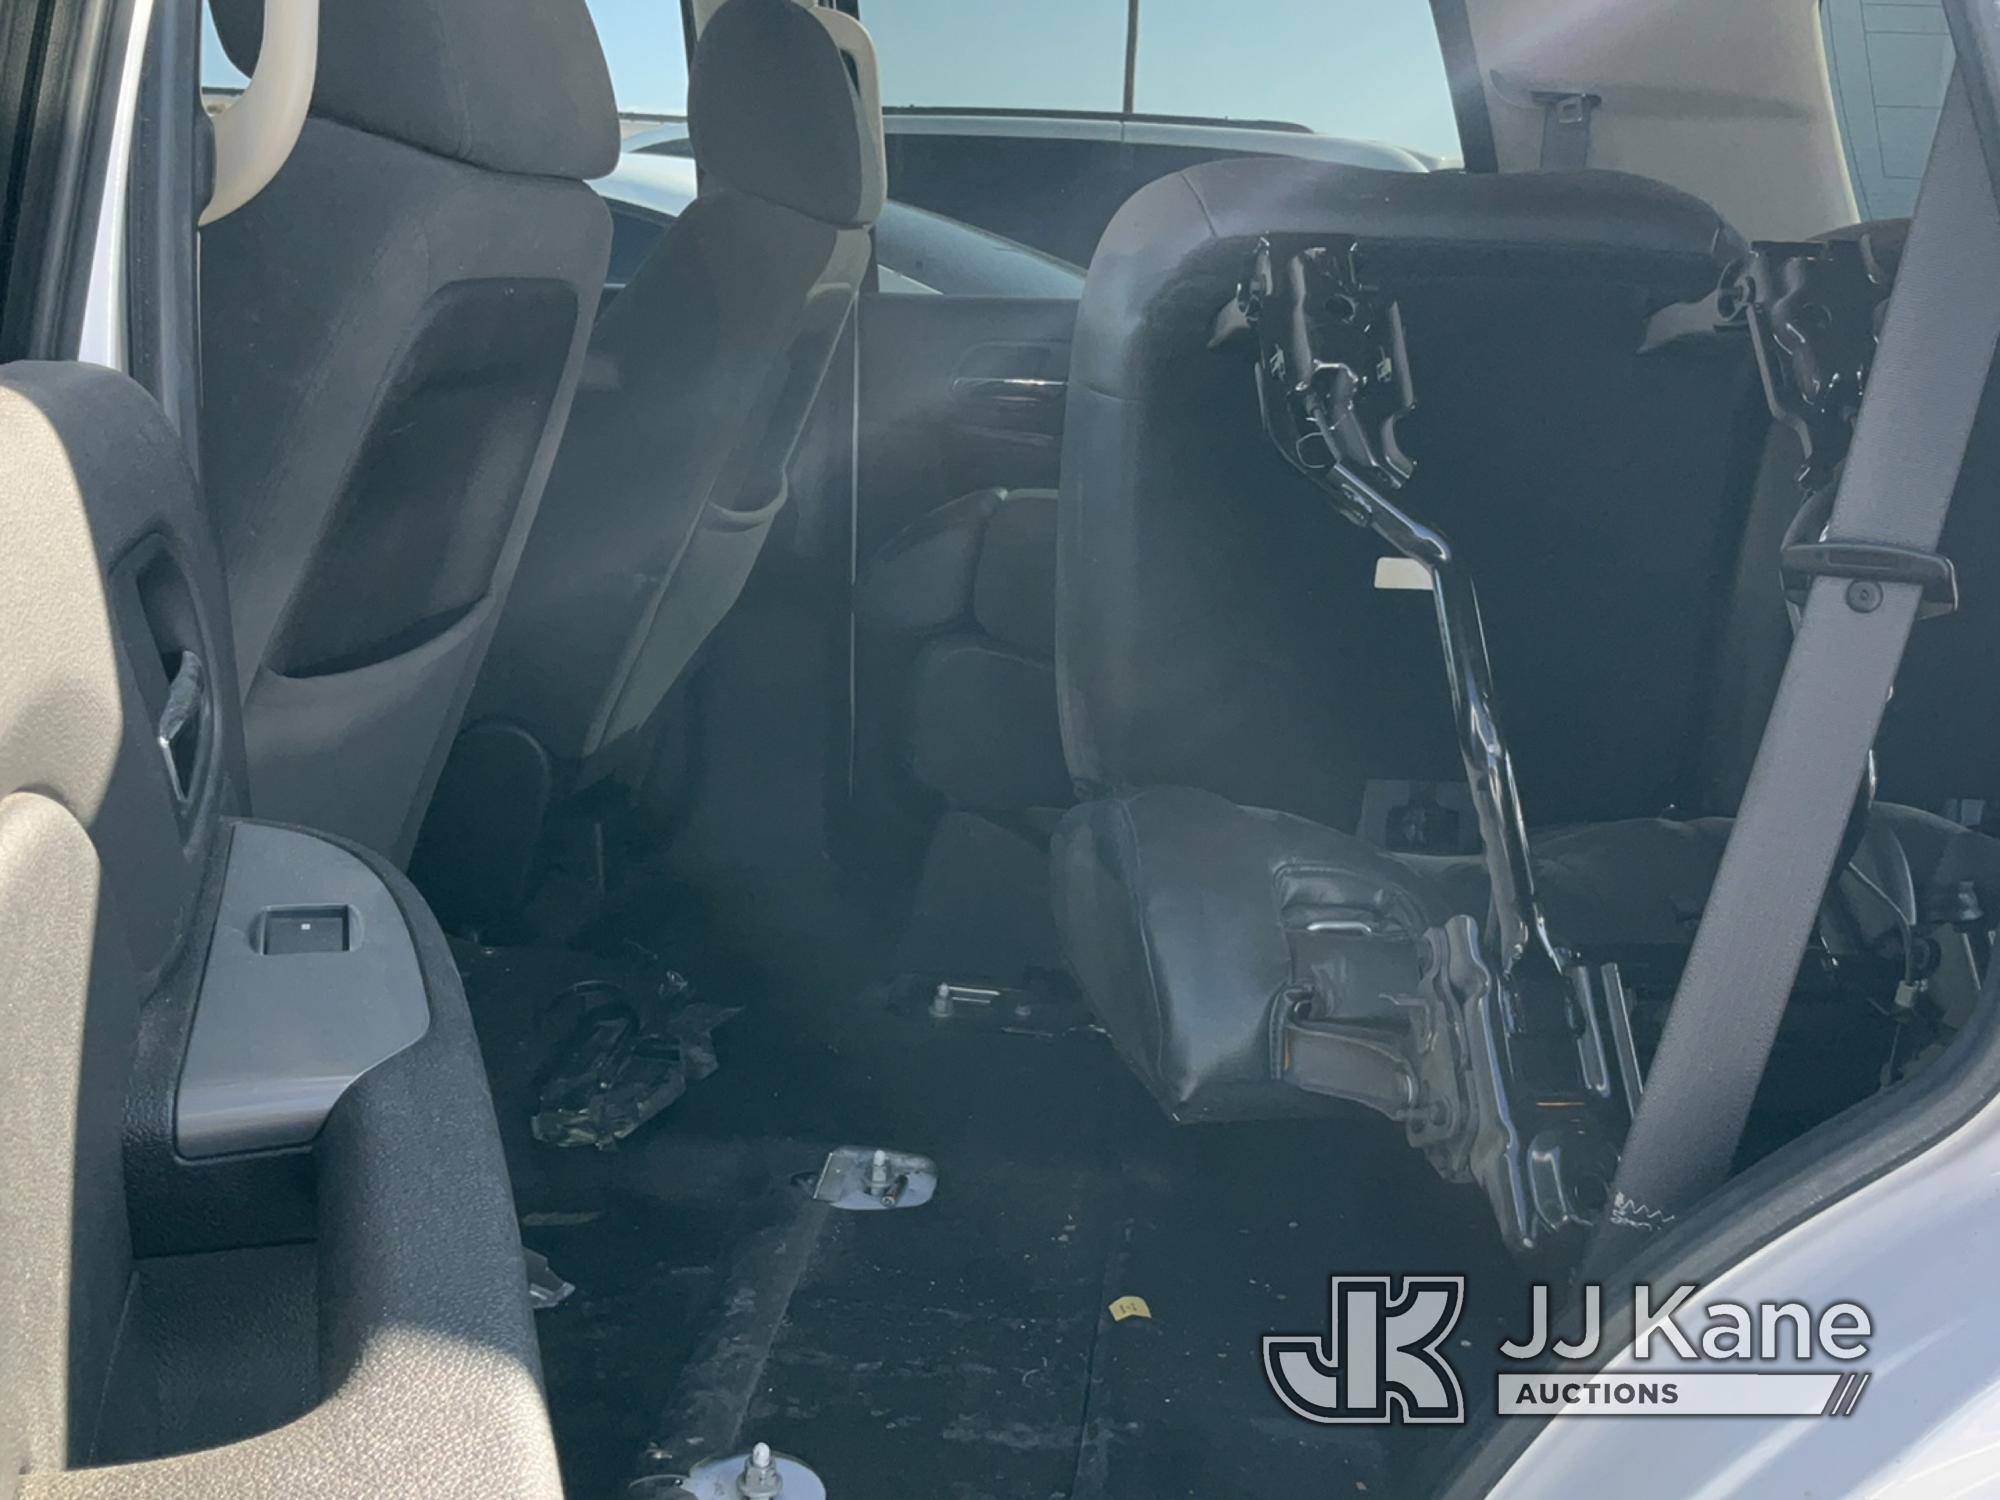 (Las Vegas, NV) 2008 Chevrolet Tahoe Police Package Towed In, Rear Seat Unsecured Wrecked, Runs & Mo